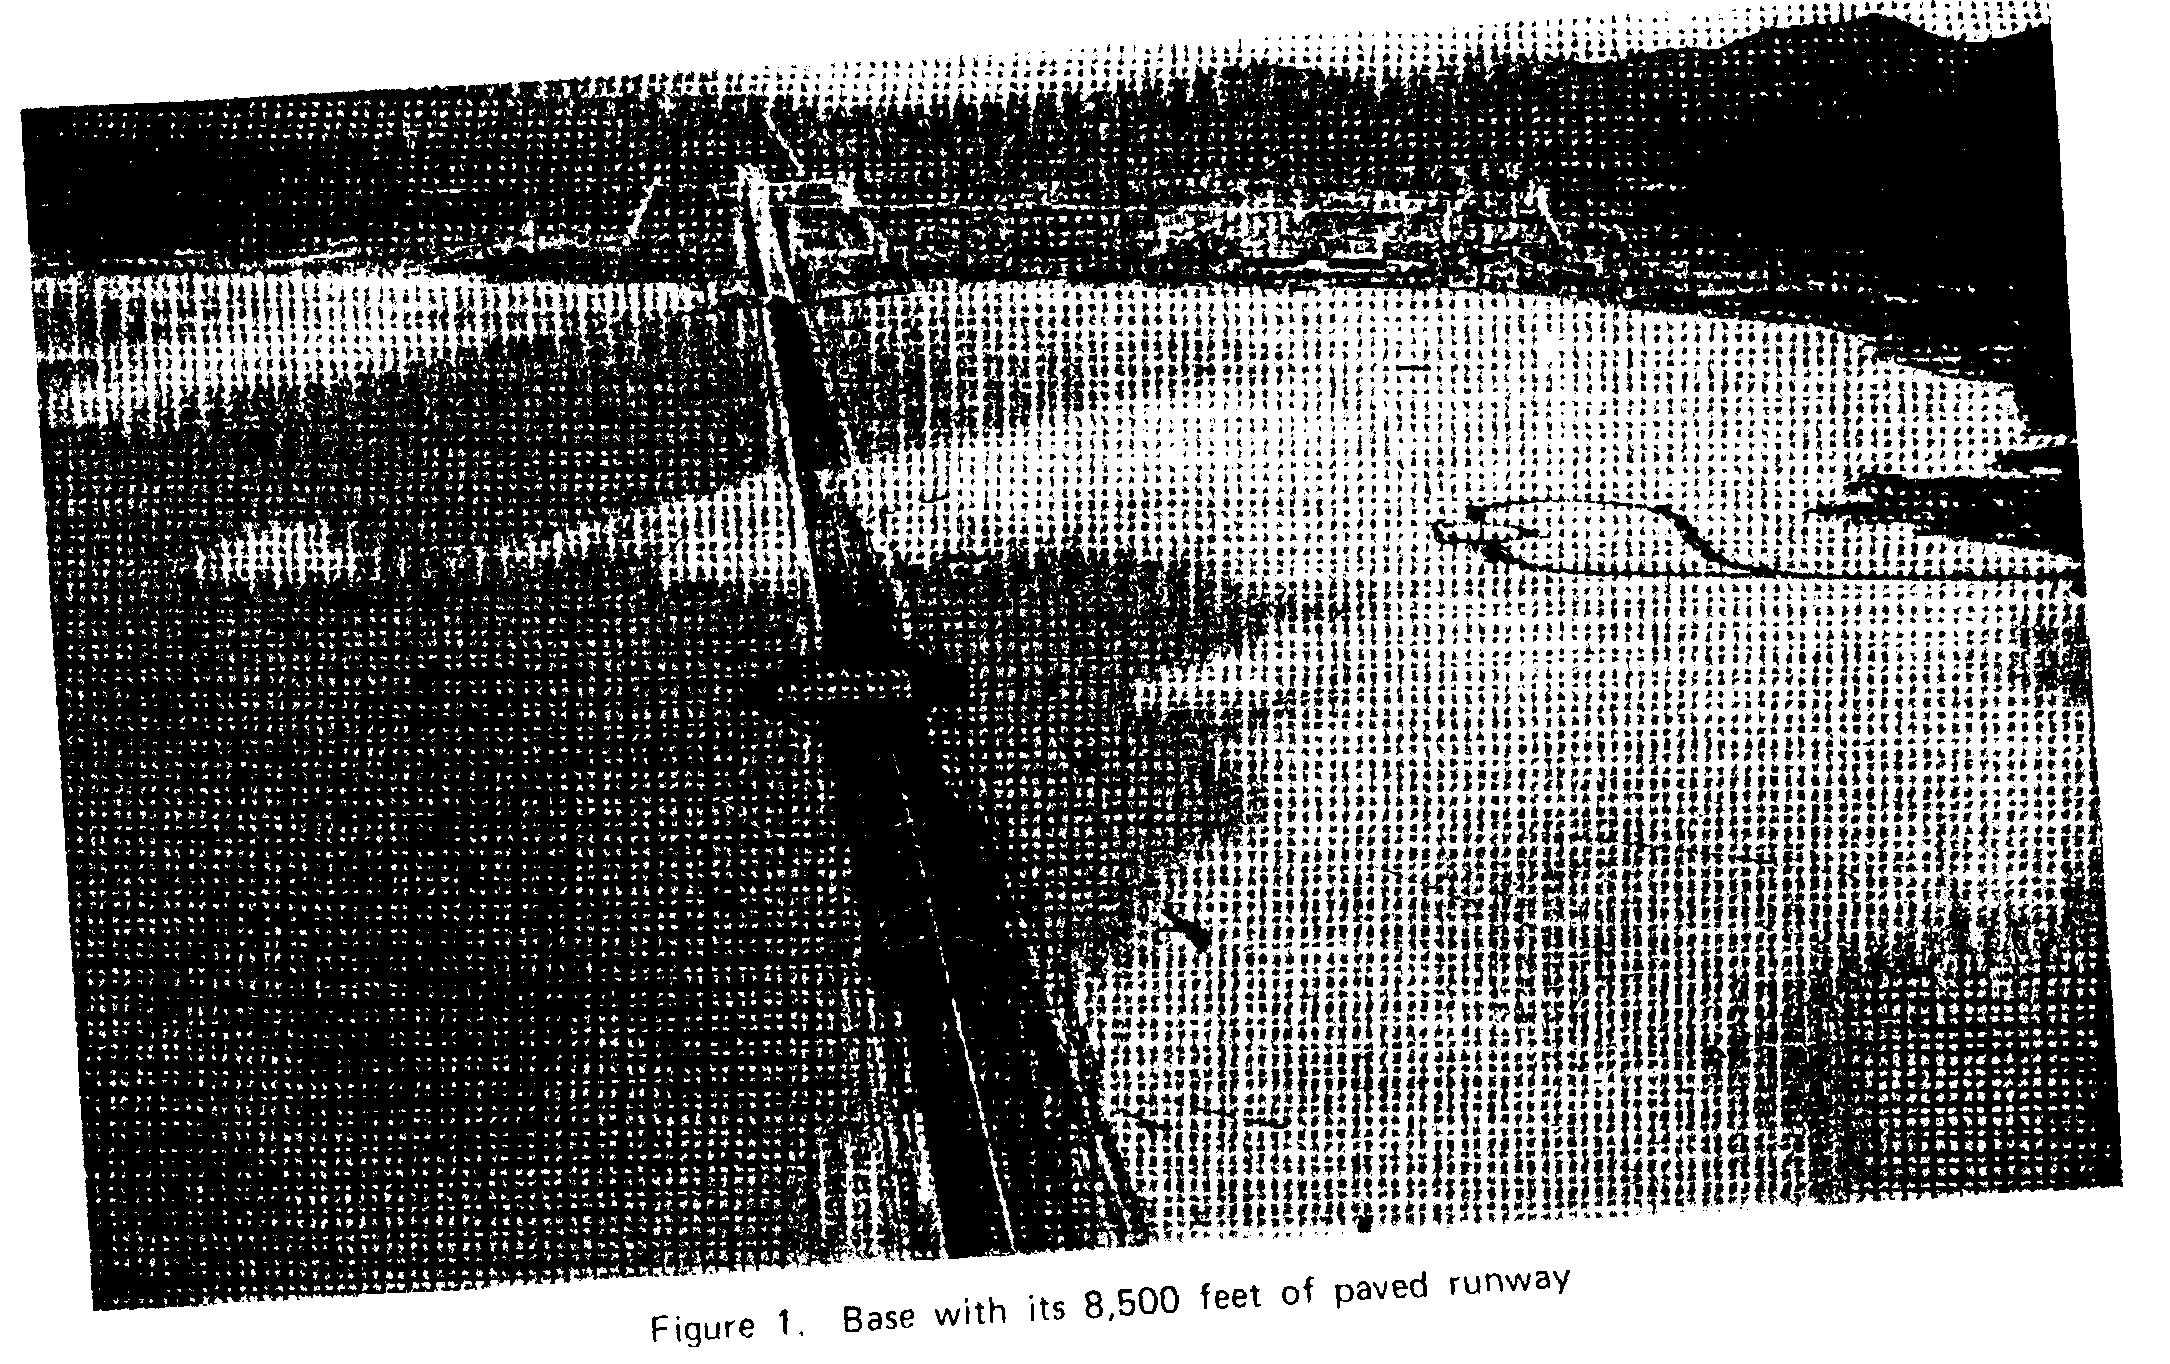 A black and white image of the base with 8,500 feet of paved runway.